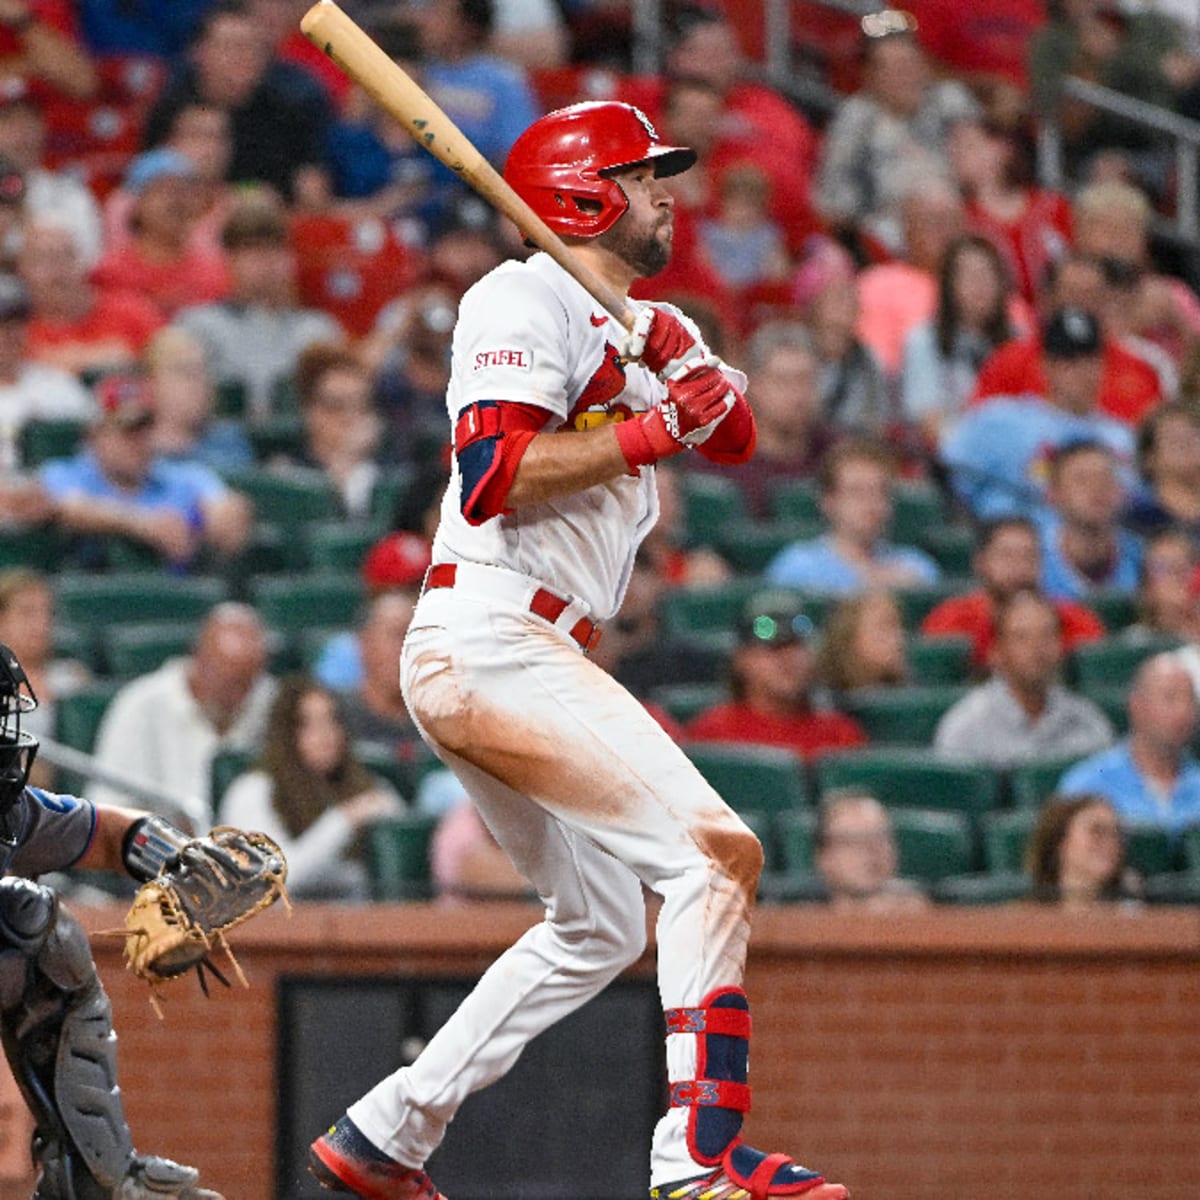 Two Important Cardinals Players Already Dealing With Injuries